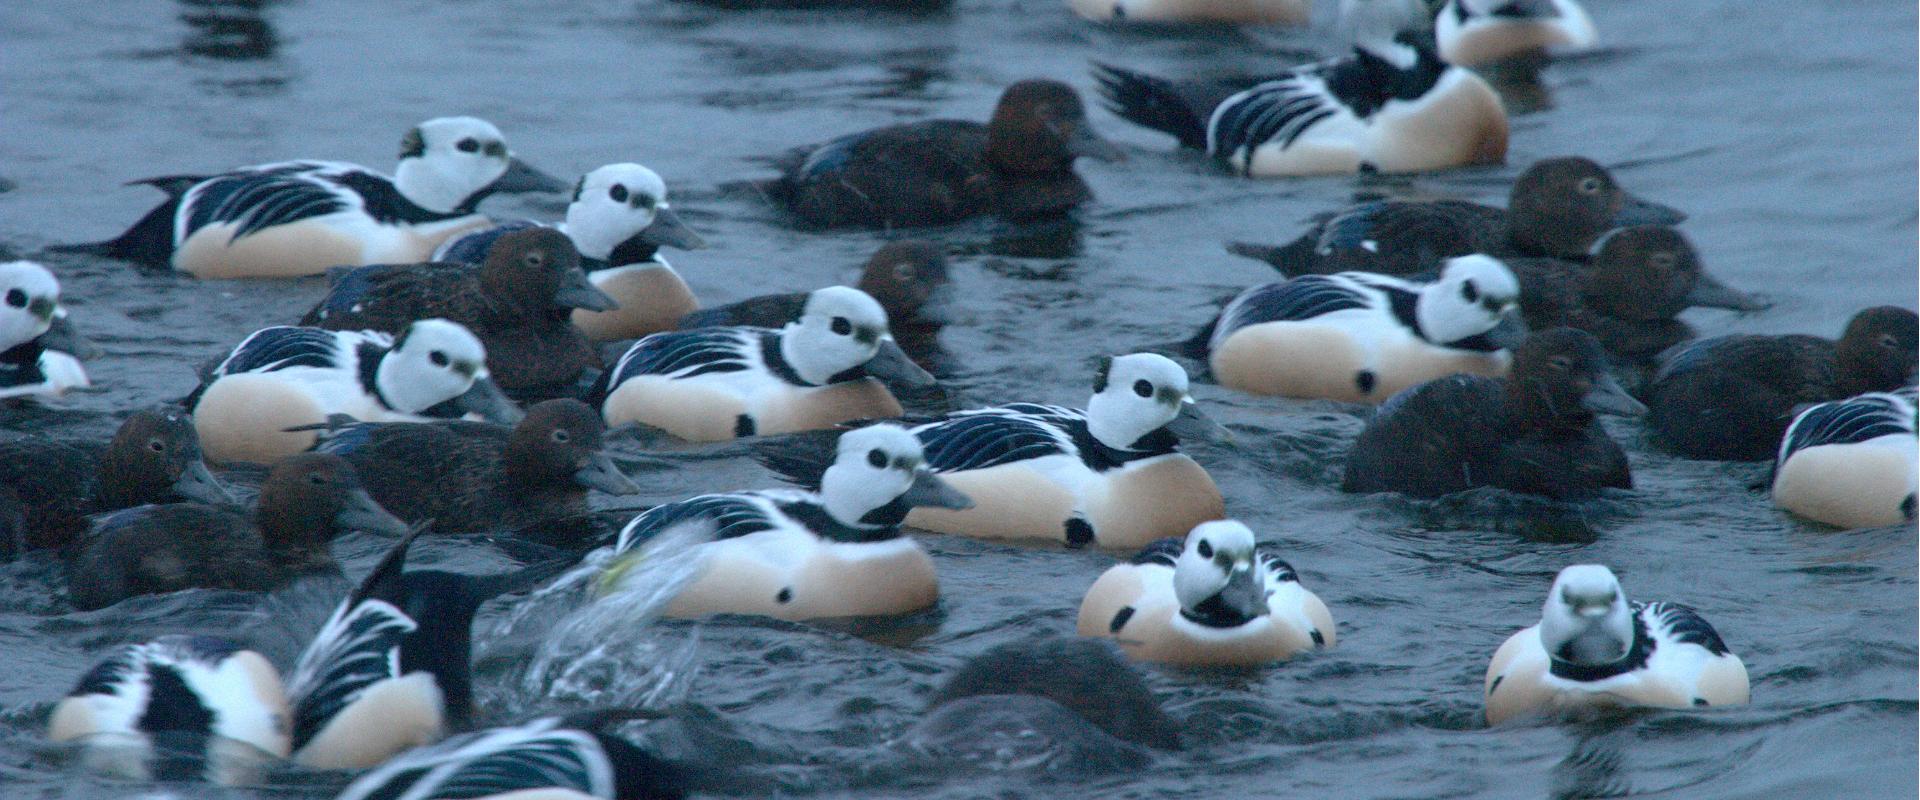 About 2,000 Steller's Eiders winter in Western Estonian coastal waters. In Early spring, they come closer to shore and are easier to see. At the same 